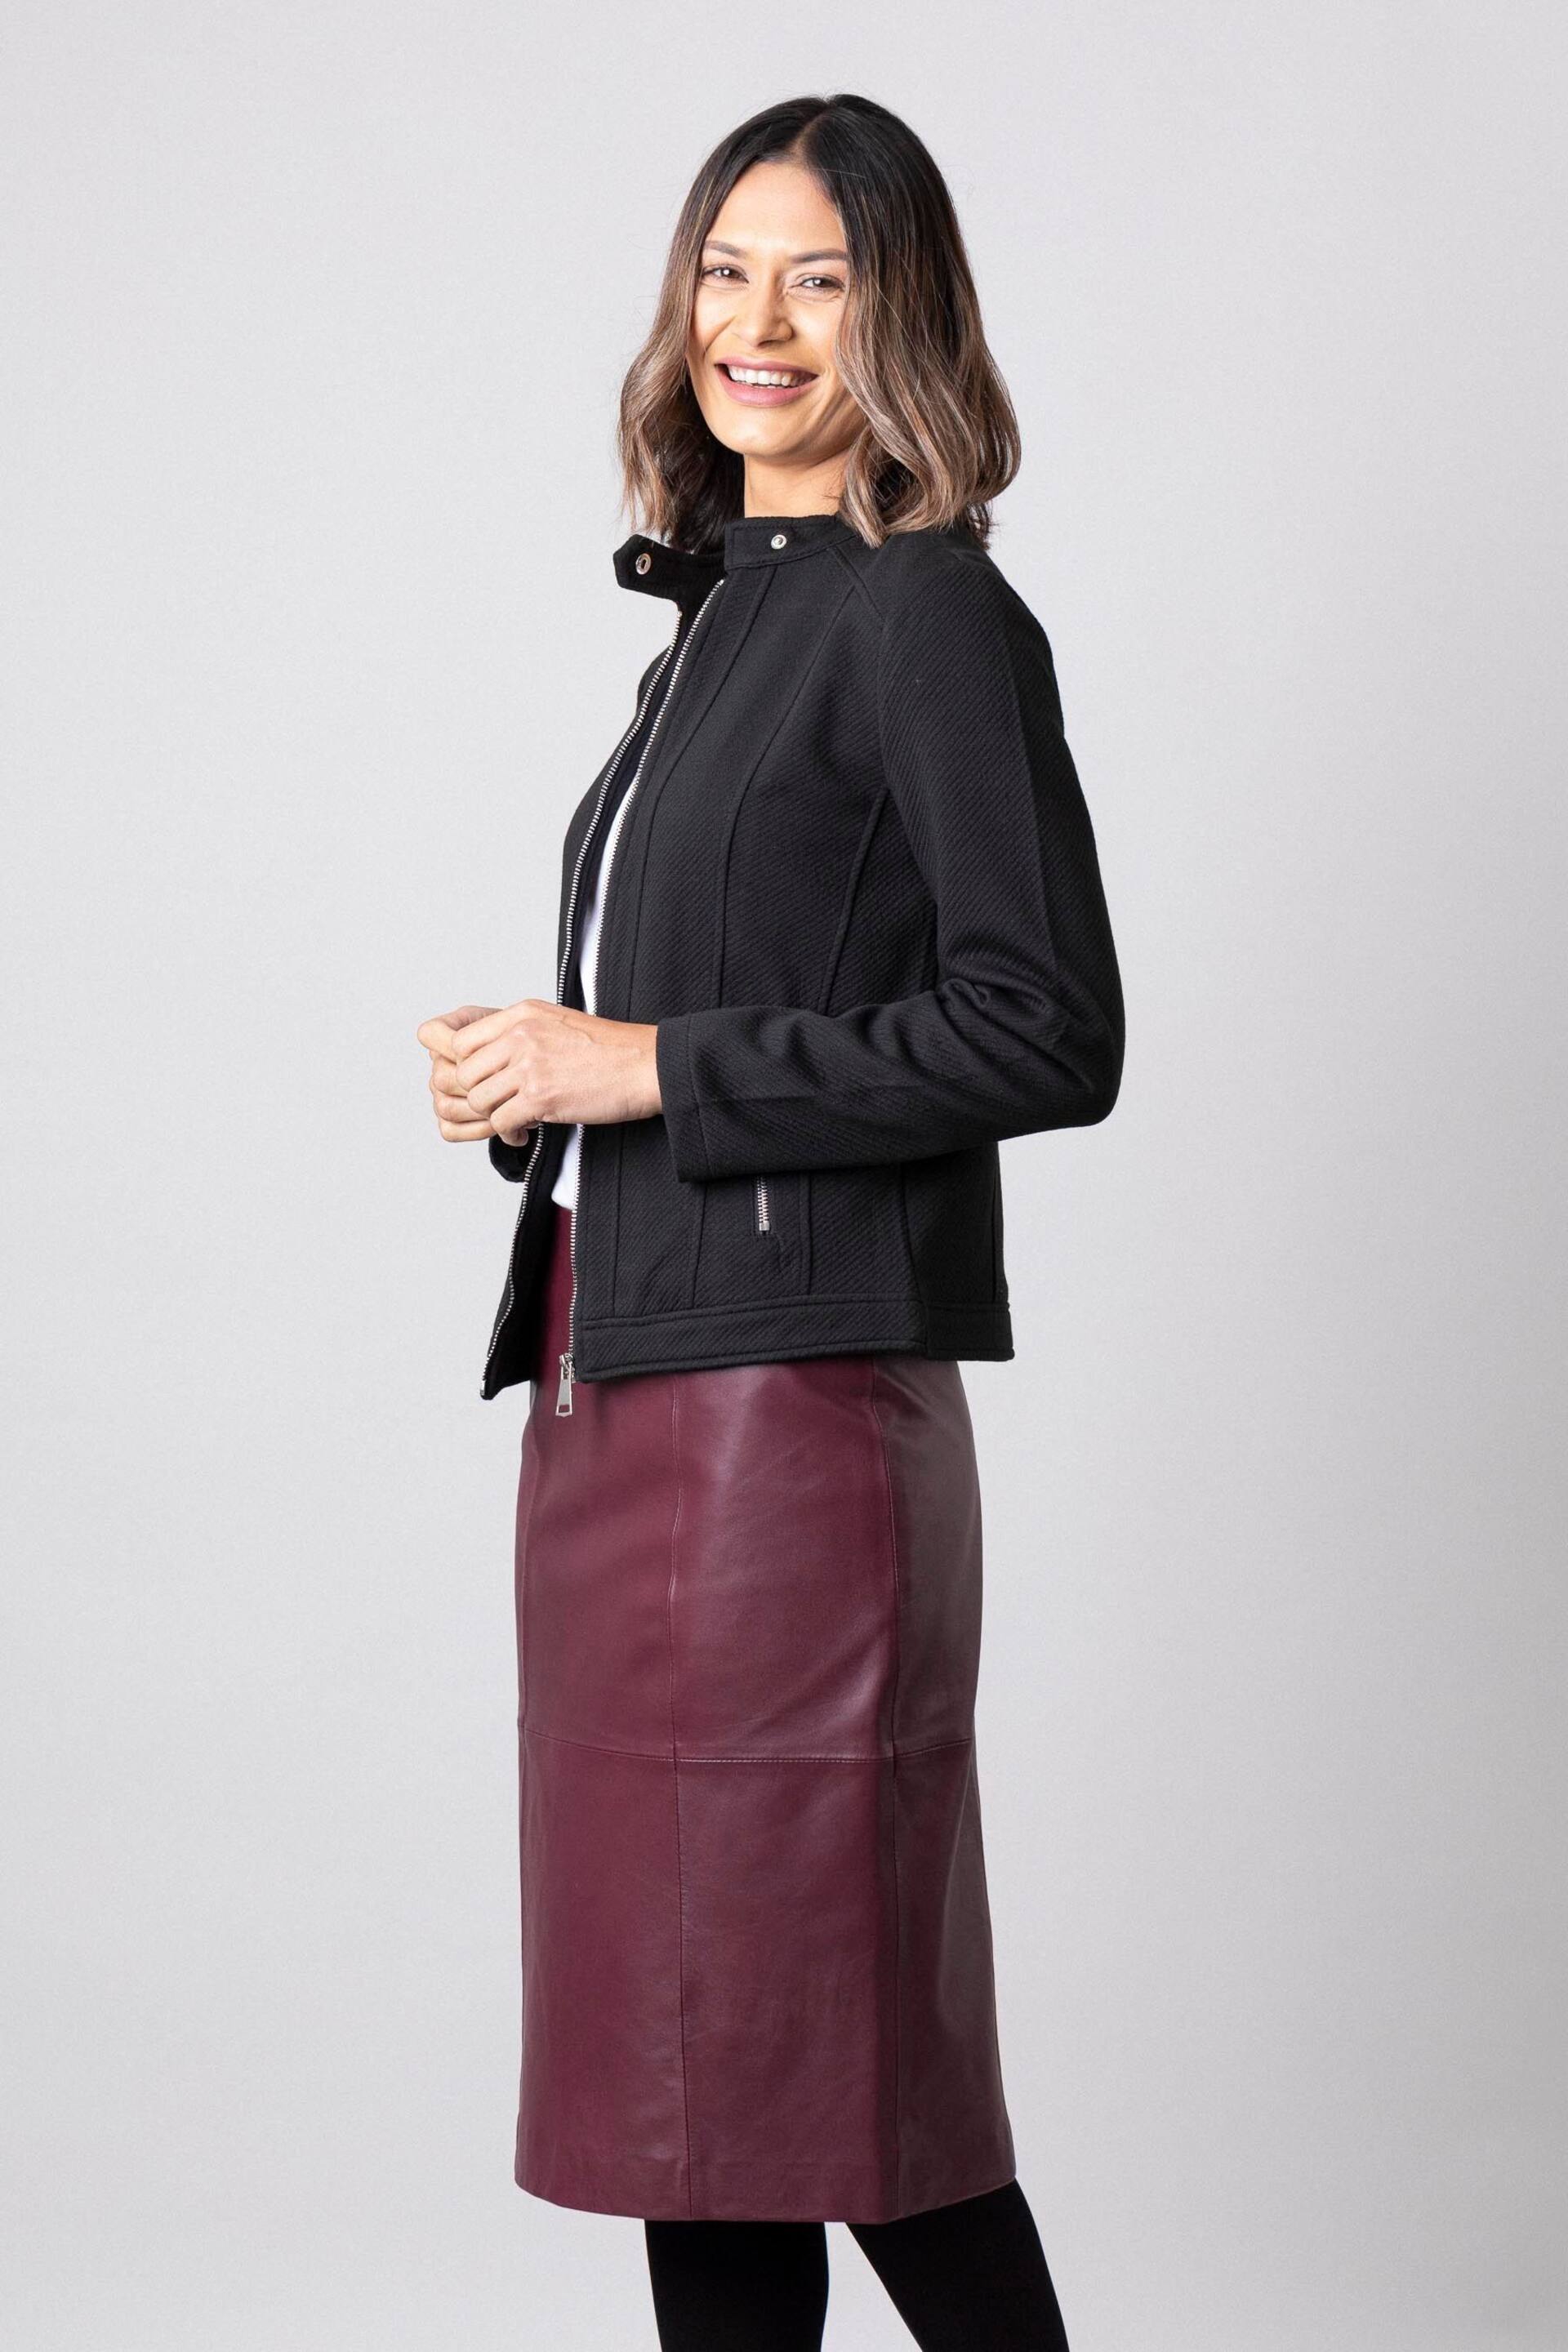 Lakeland Leather High Waisted Leather Pencil Skirt - Image 6 of 8